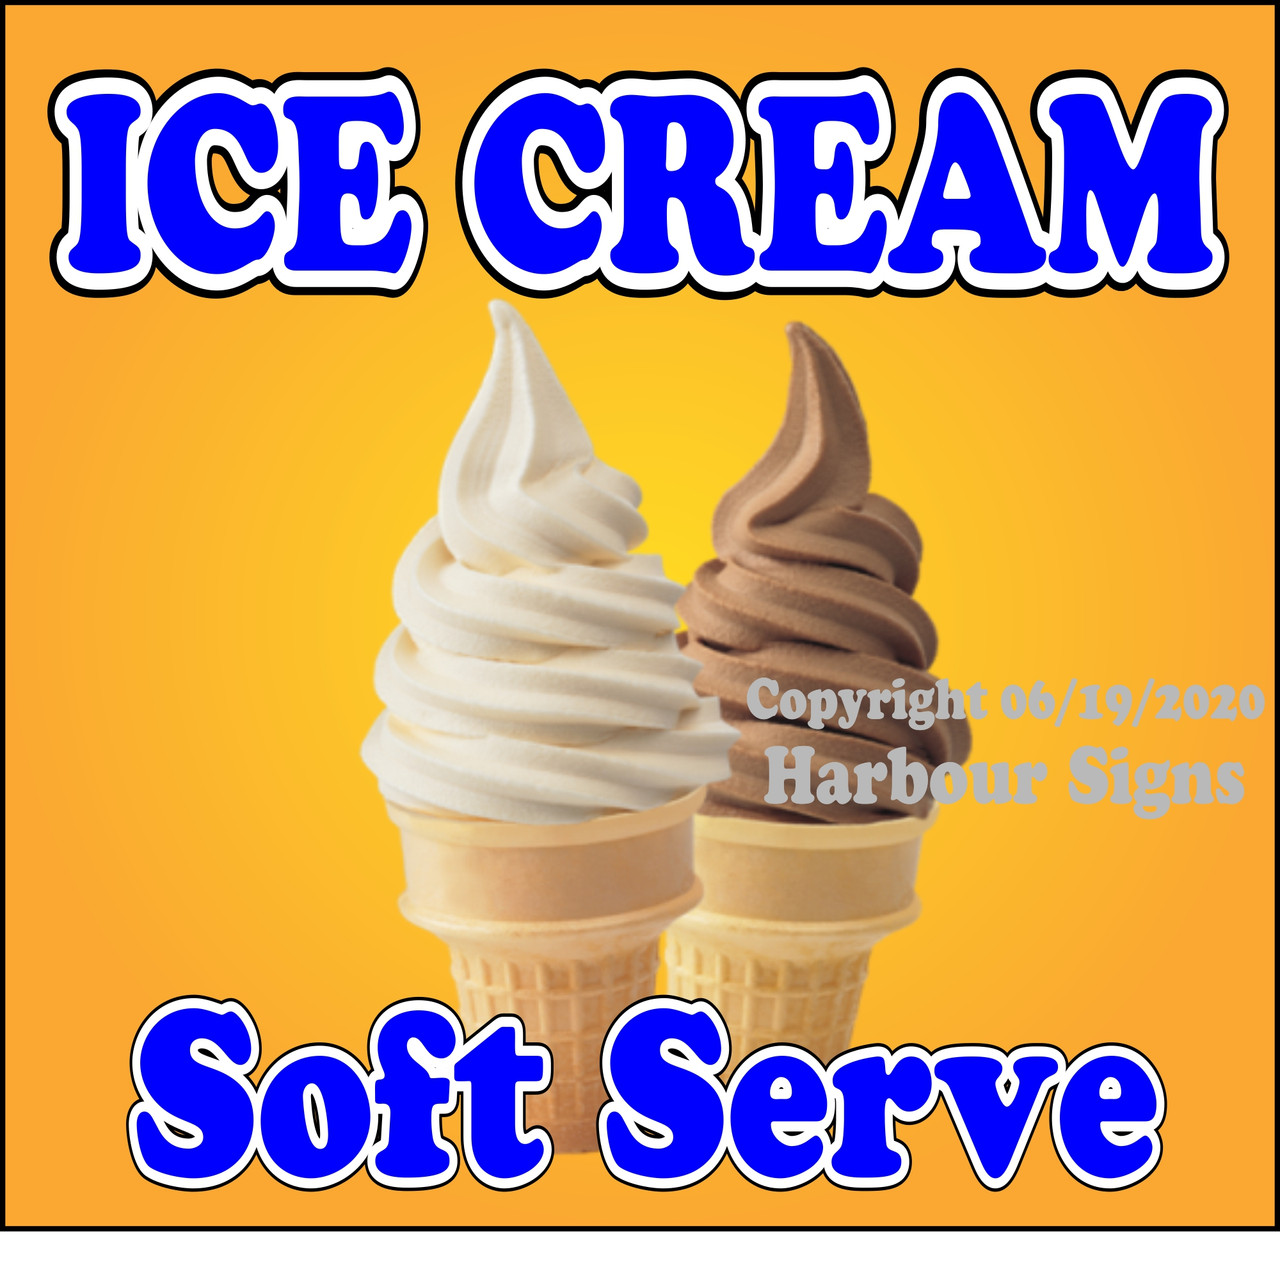 Details about   Soft Serve Ice Cream DECAL Cone Food Truck Concession Sticker Choose Your Size 